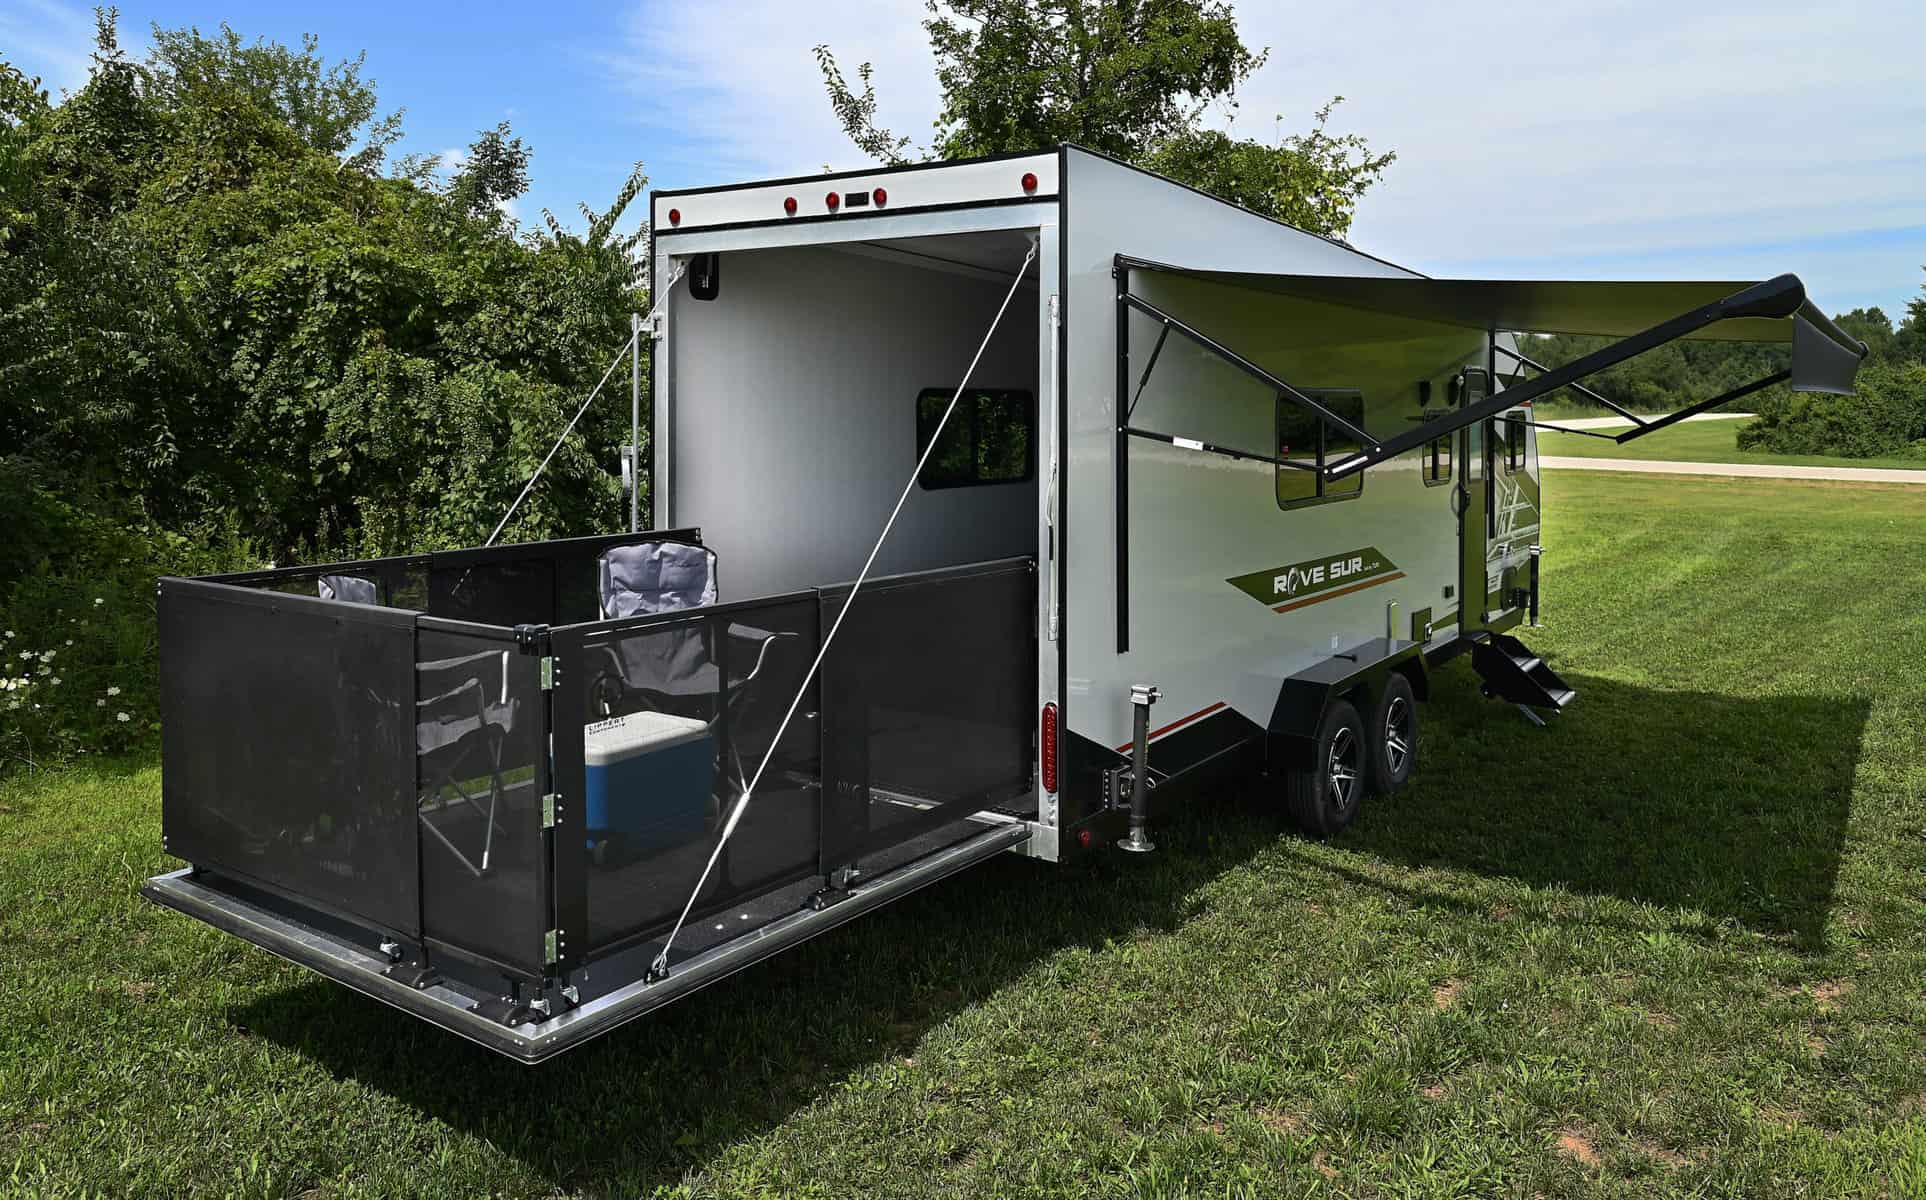 Rove SUR makes one of the best 2023 toy hauler travel trailers